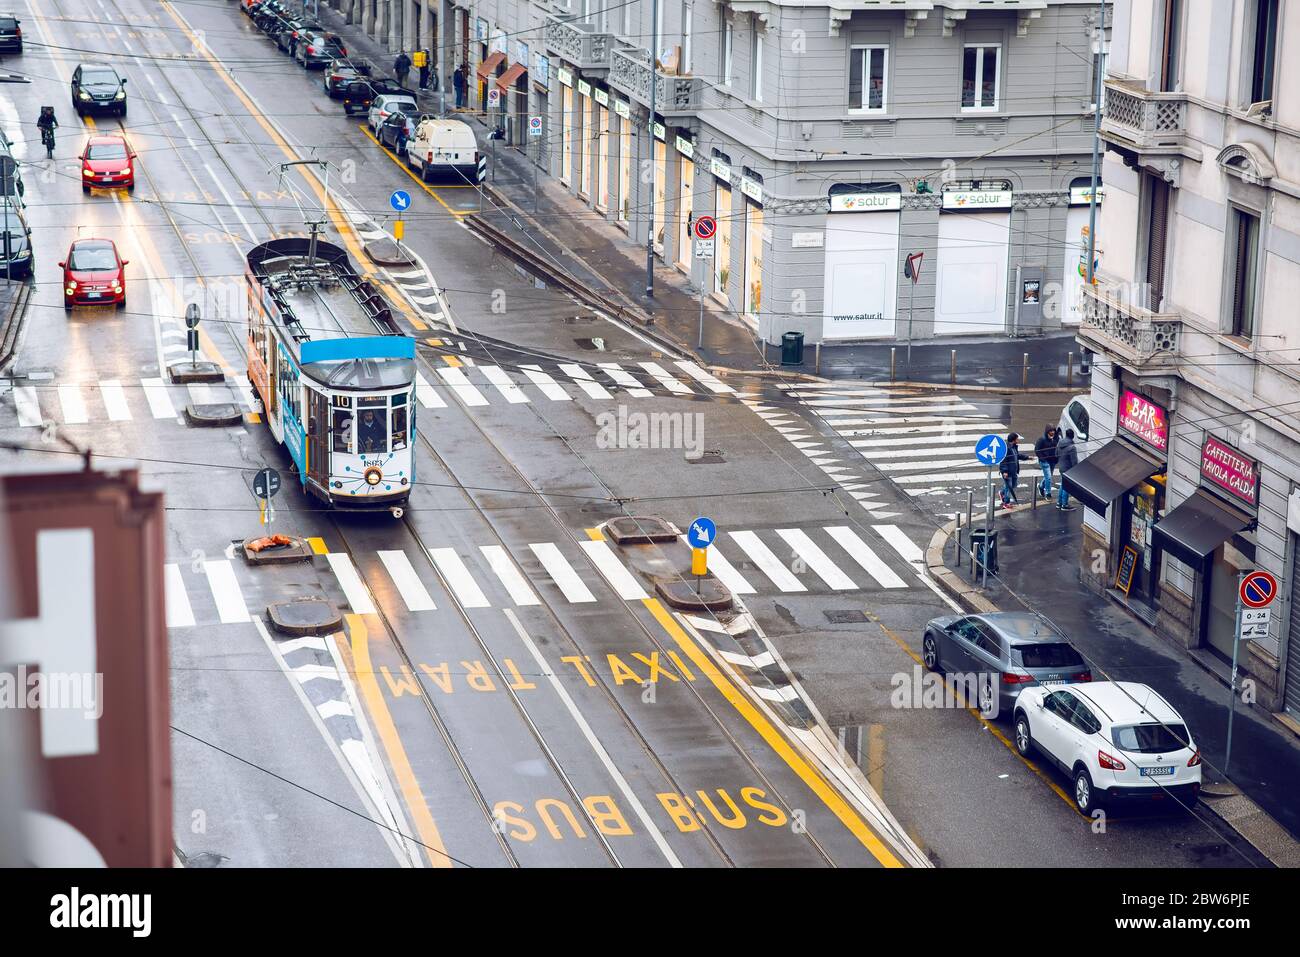 Milan. Italy - May 19, 2019: Street Panorama in Milan with Tram after Rain. Aerial View. Pedestrians and Cars on a Cloudy Day. Bus, Taxi and Tram Lane Stock Photo